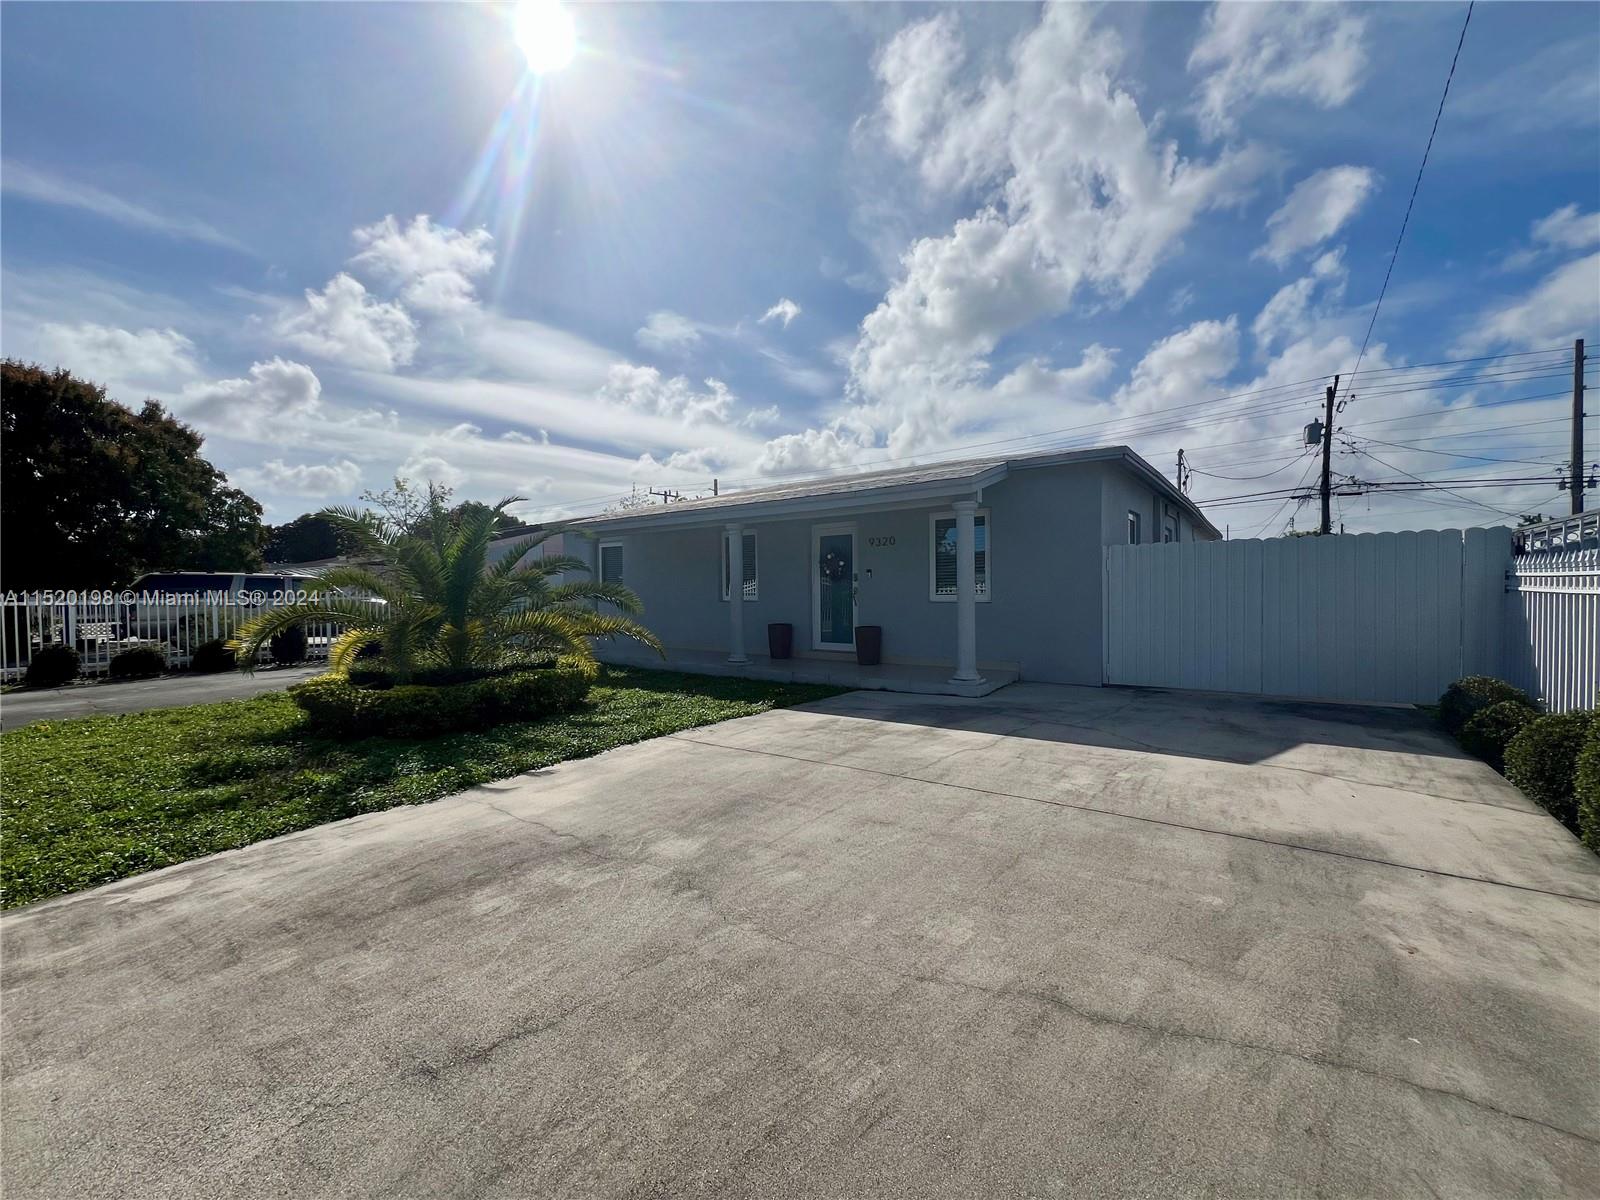 9320 NW 35th Ct, Miami, Florida 33147, 4 Bedrooms Bedrooms, ,2 BathroomsBathrooms,Residential,For Sale,9320 NW 35th Ct,A11520198